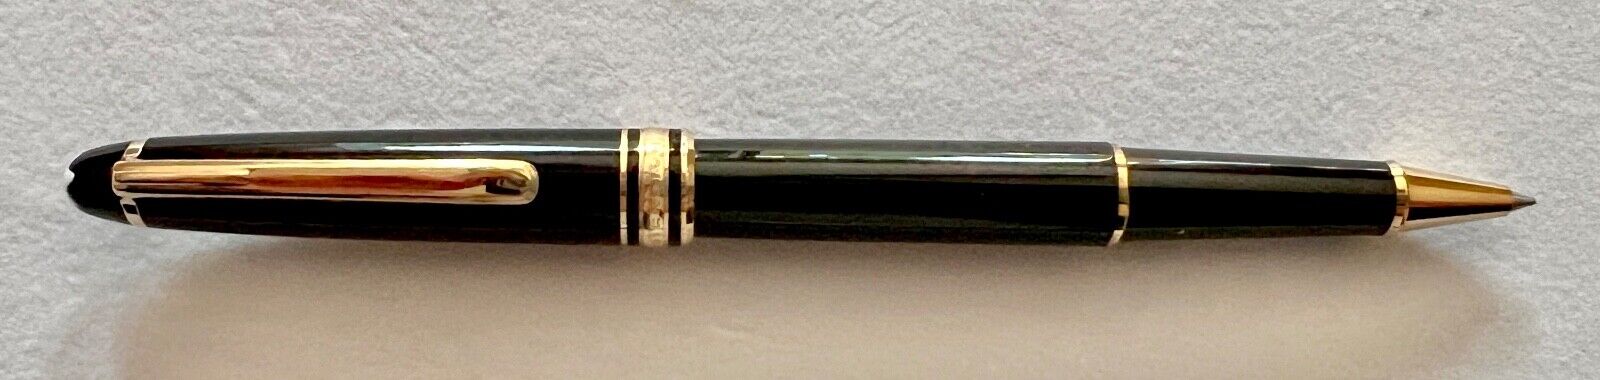 MONTBLANC Classic Meisterstück Rollerball Pen 163 - Black - NEVER USED